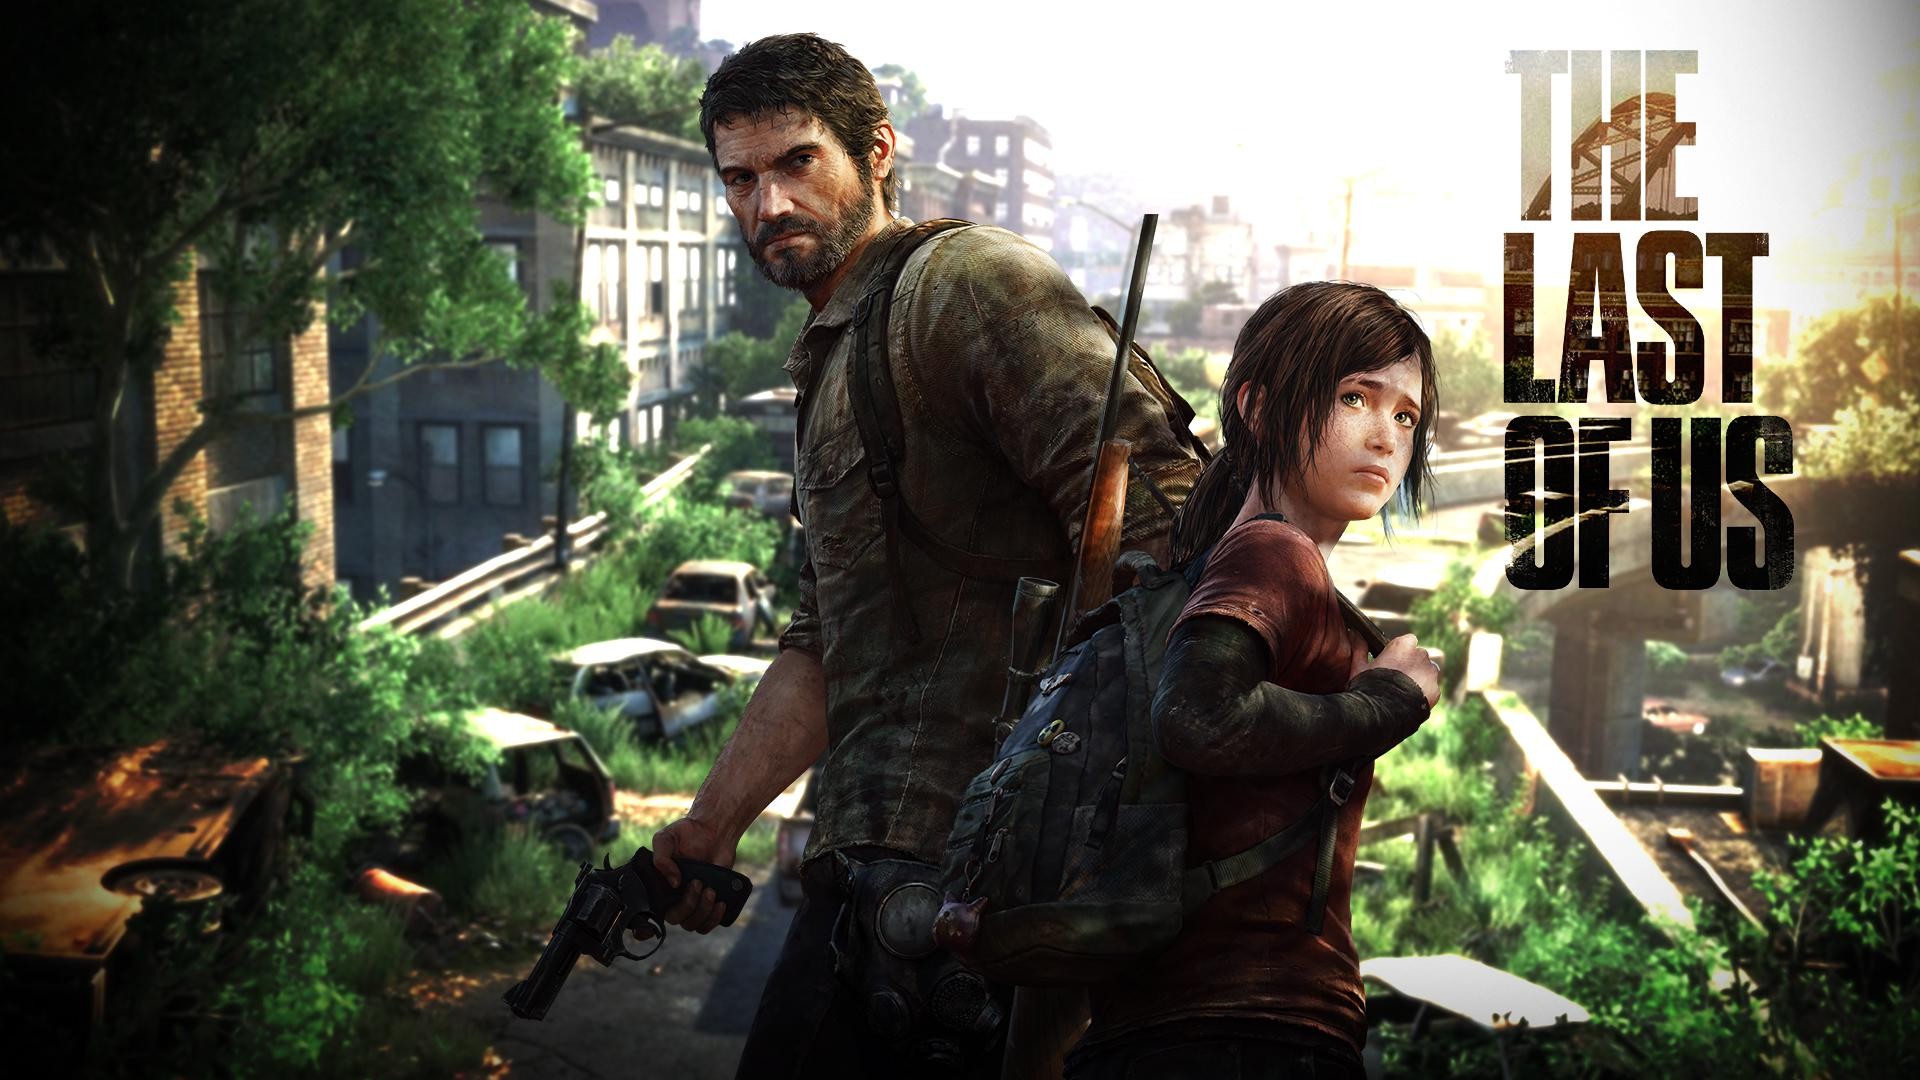 Awesome The Last Of Us Wallpaper Hd